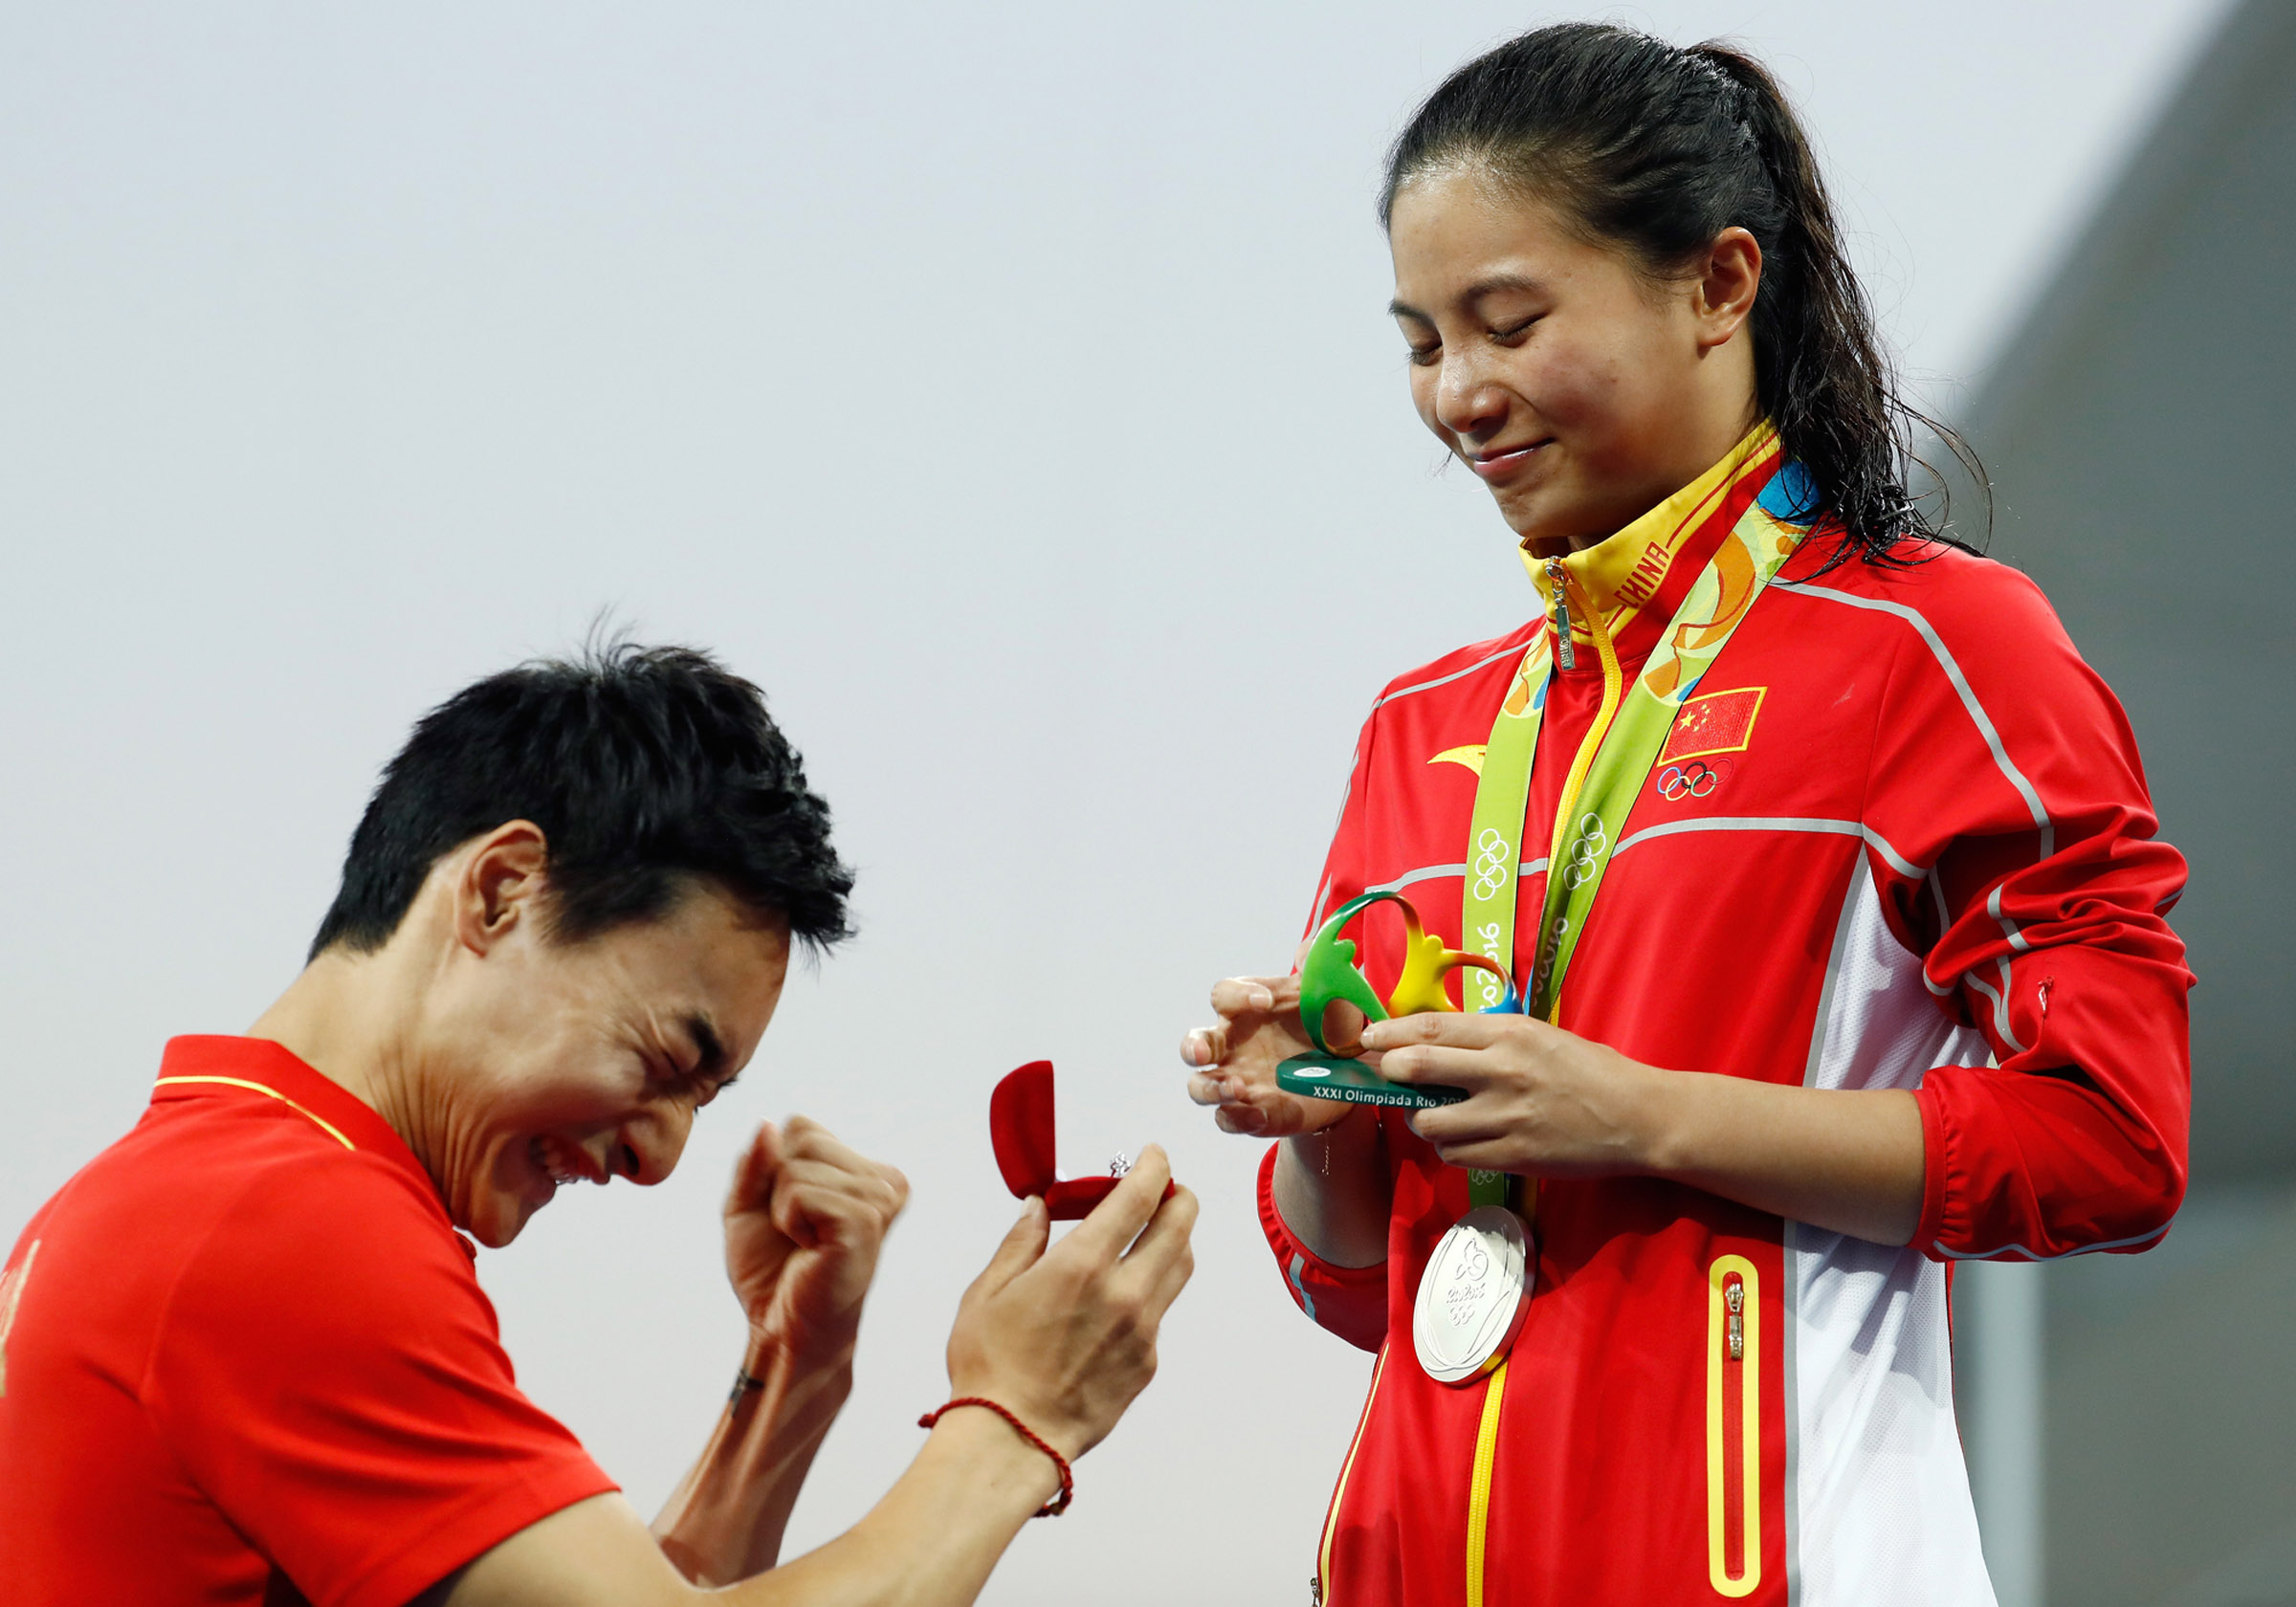 Chinese divers get engaged on Olympic medal stage